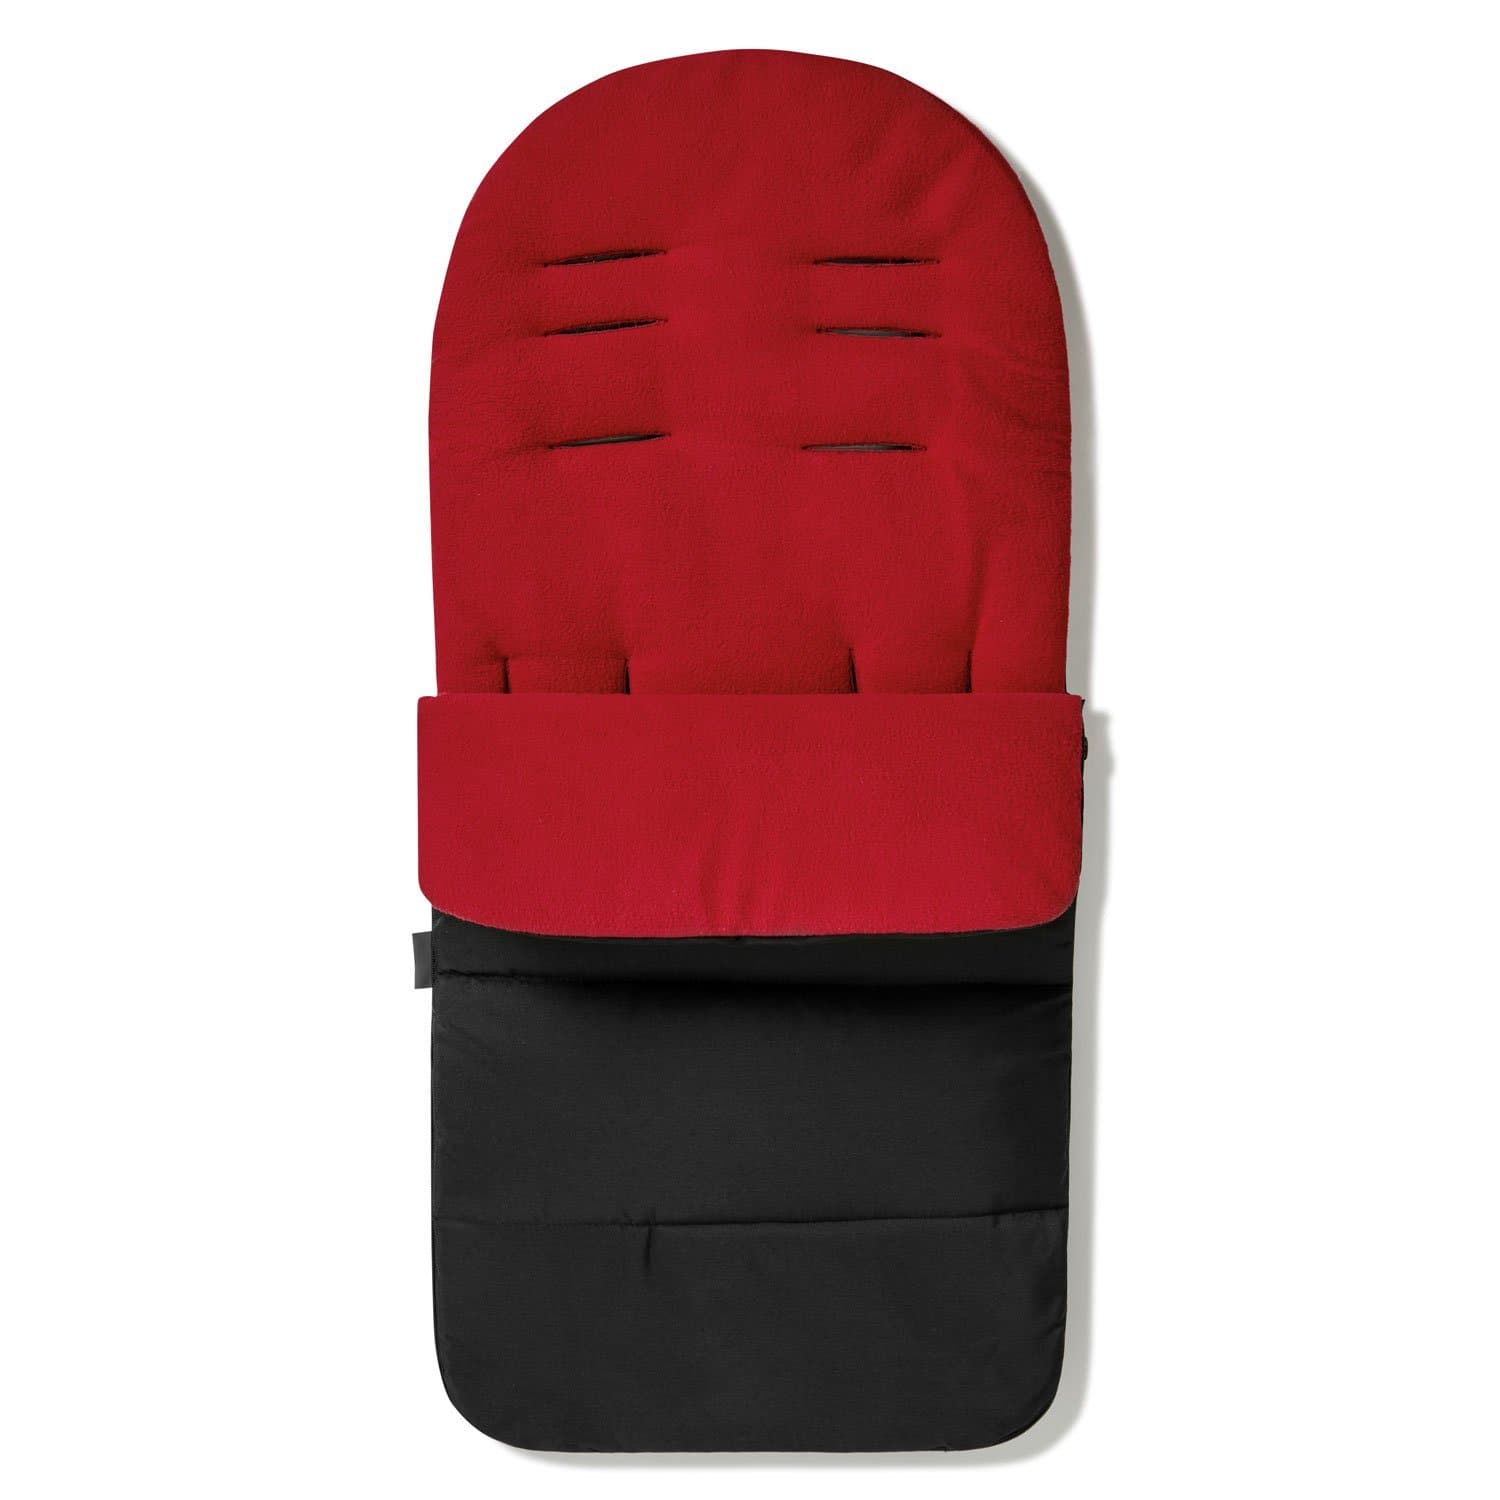 Premium Footmuff / Cosy Toes Compatible with Mamas & Papas - Fire Red / Fits All Models | For Your Little One